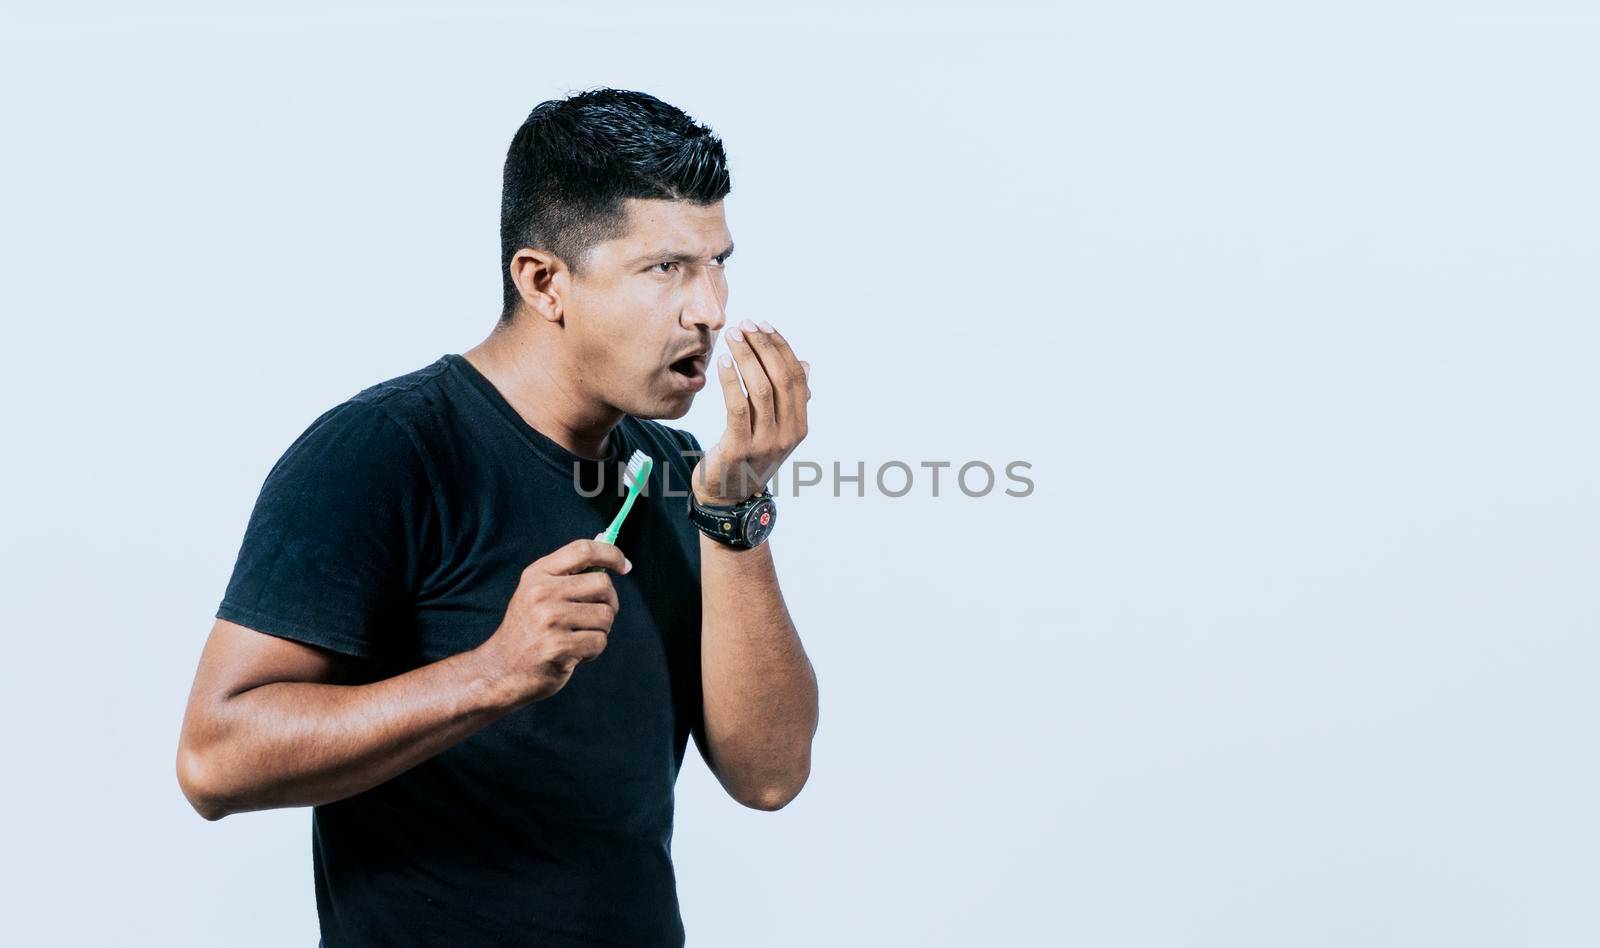 Person with brush with bad breath problem, Man with brush and bad breath, Concept of person with halitosis